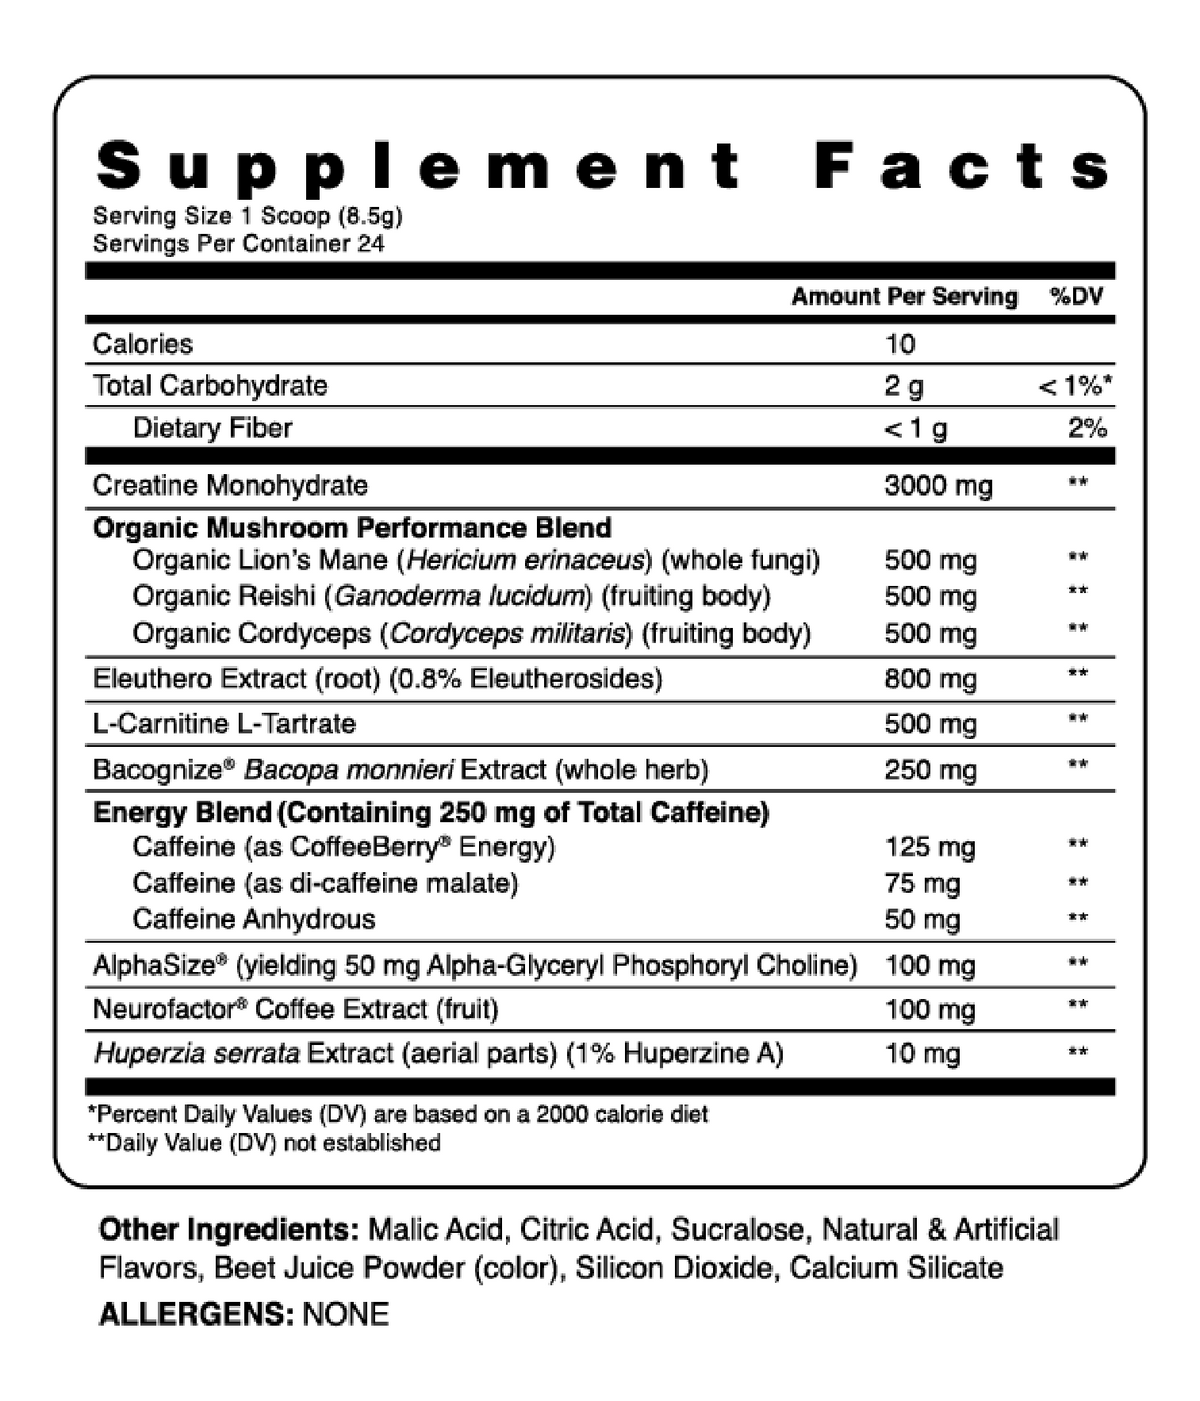 Supplement Facts. Serving size: 1 scoop, 8.5g. Servings per container: 24. Calories: 10. Total Carbohydrate: 2g. Creatine Monohydrate: 3000mg. Organic Mushroom Performance Blend: Organic lion&#39;s mane 500mg, organic reishi 500mg, organic cordyceps 500mg.  Other ingredients: malic acid, citric acid, sucralose, natural and artificial flavors, beet juice powder (color), silicon dioxide, calcium sitrate.